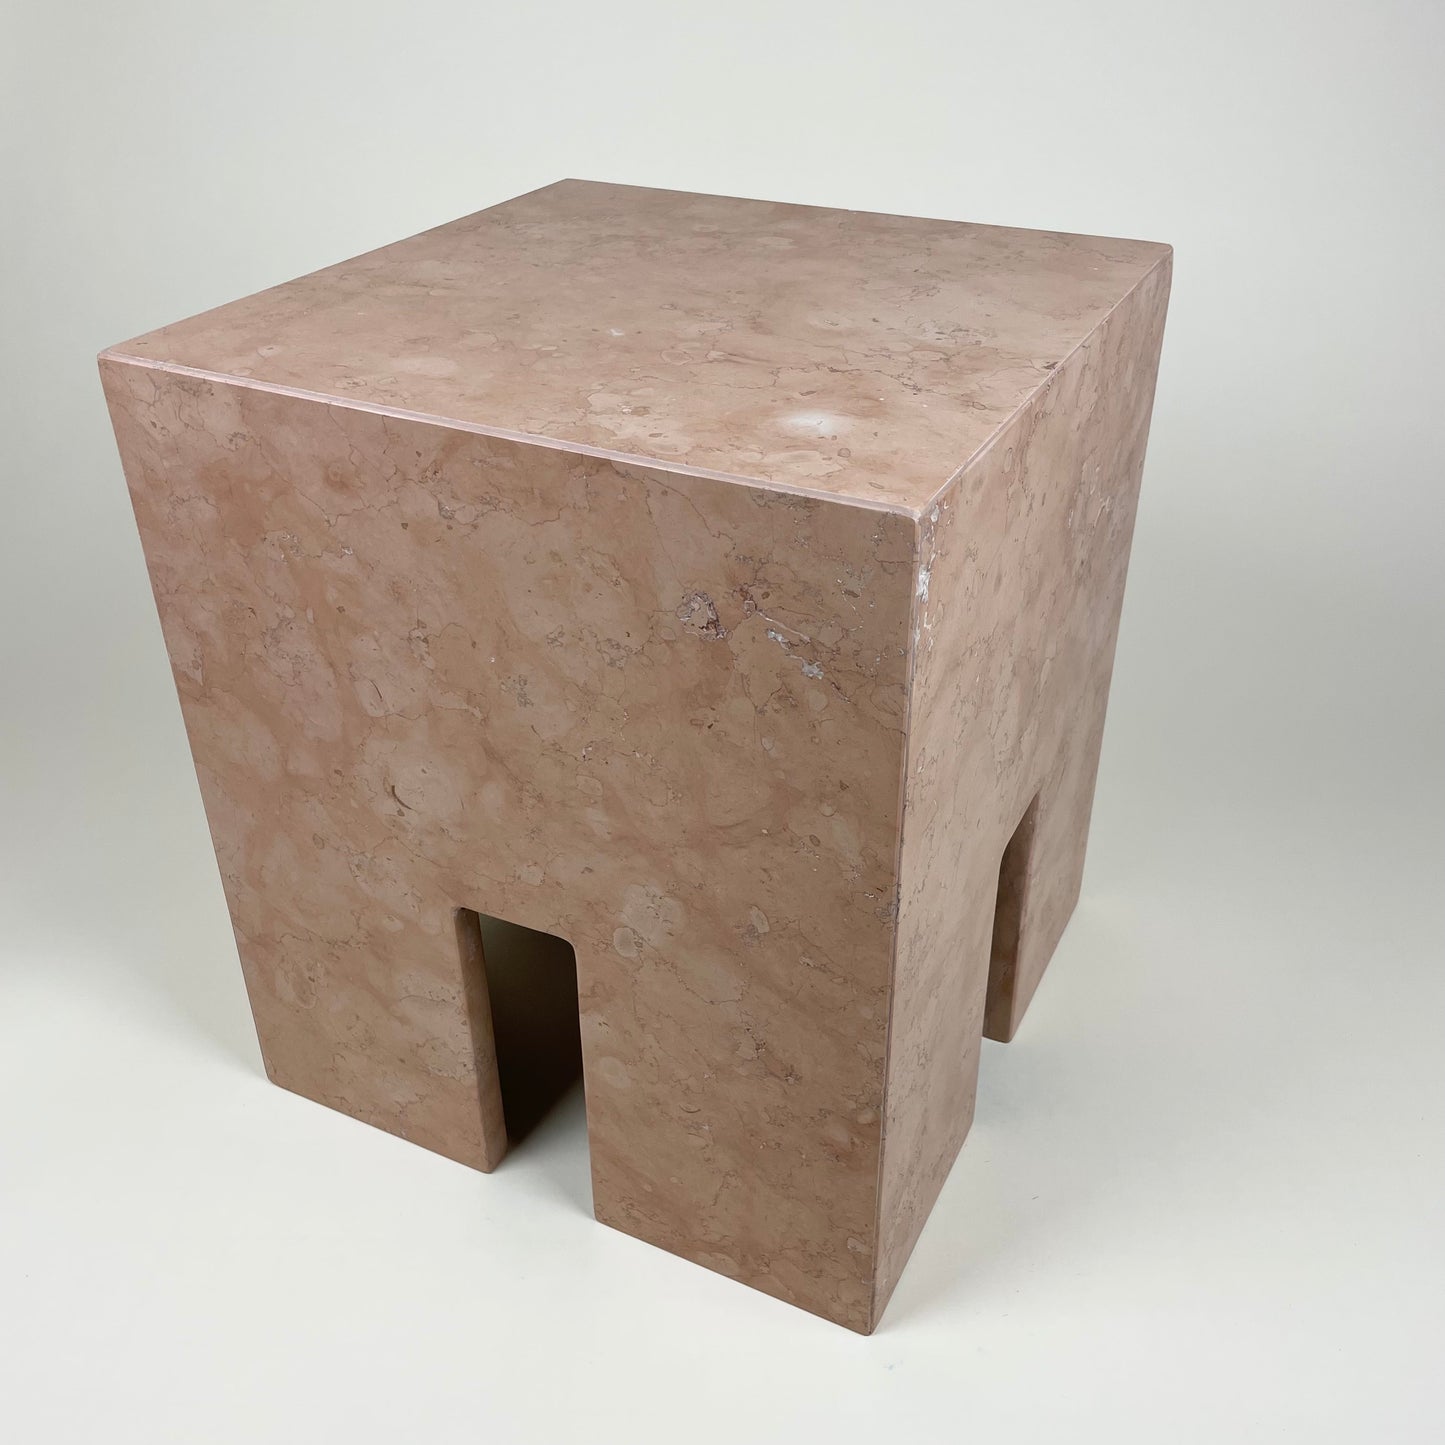 Marble side table by Public Studio